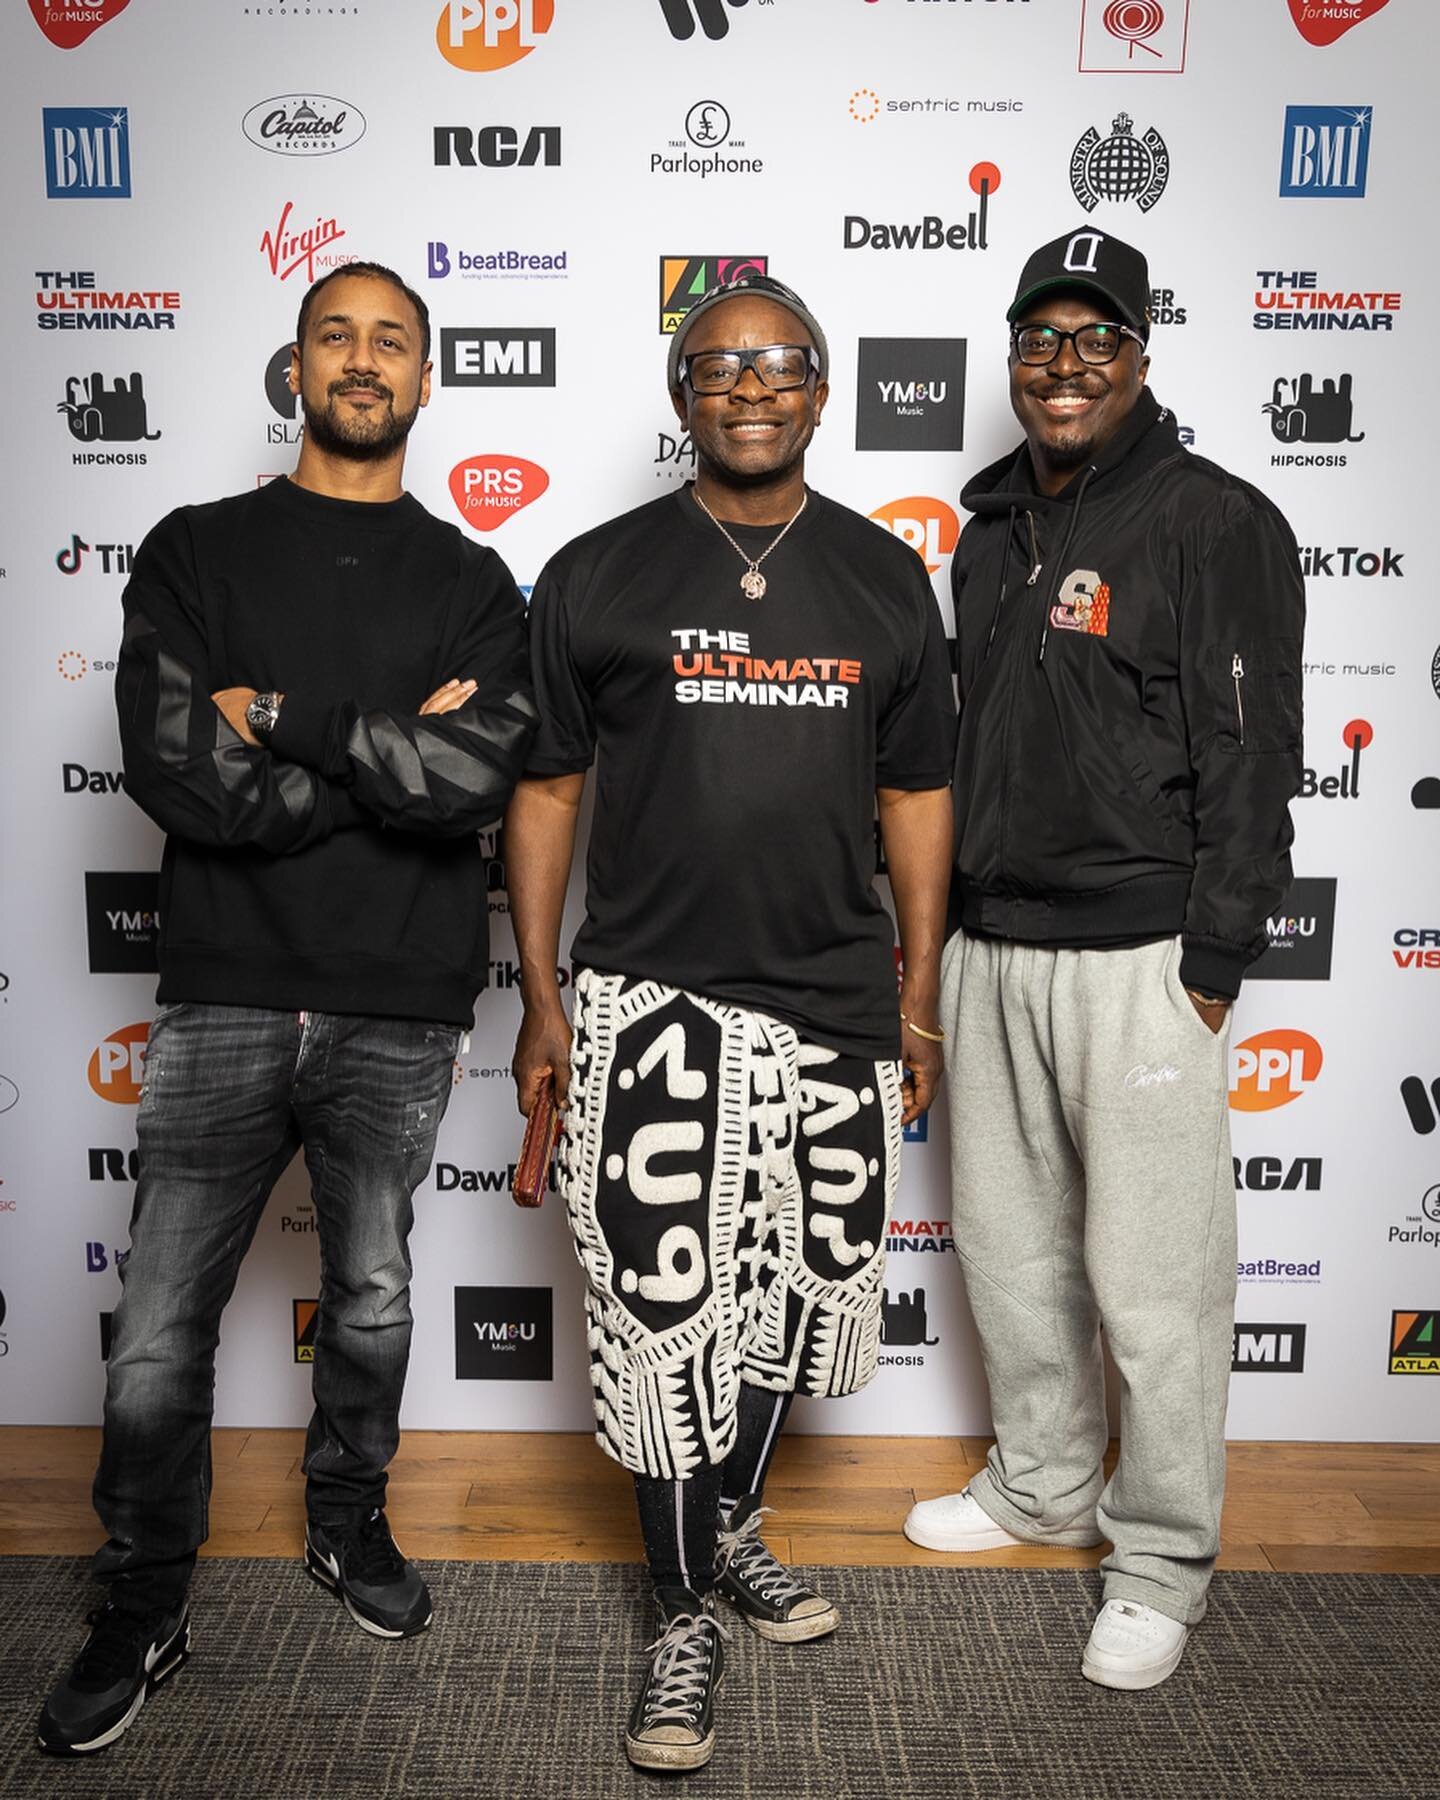 Education is for improving the lives of others and for leaving your community better than you found it.. we need events like the @ultimateseminar to share the knowledge and journeys of creatives and executives in the music business - Well done to @kw